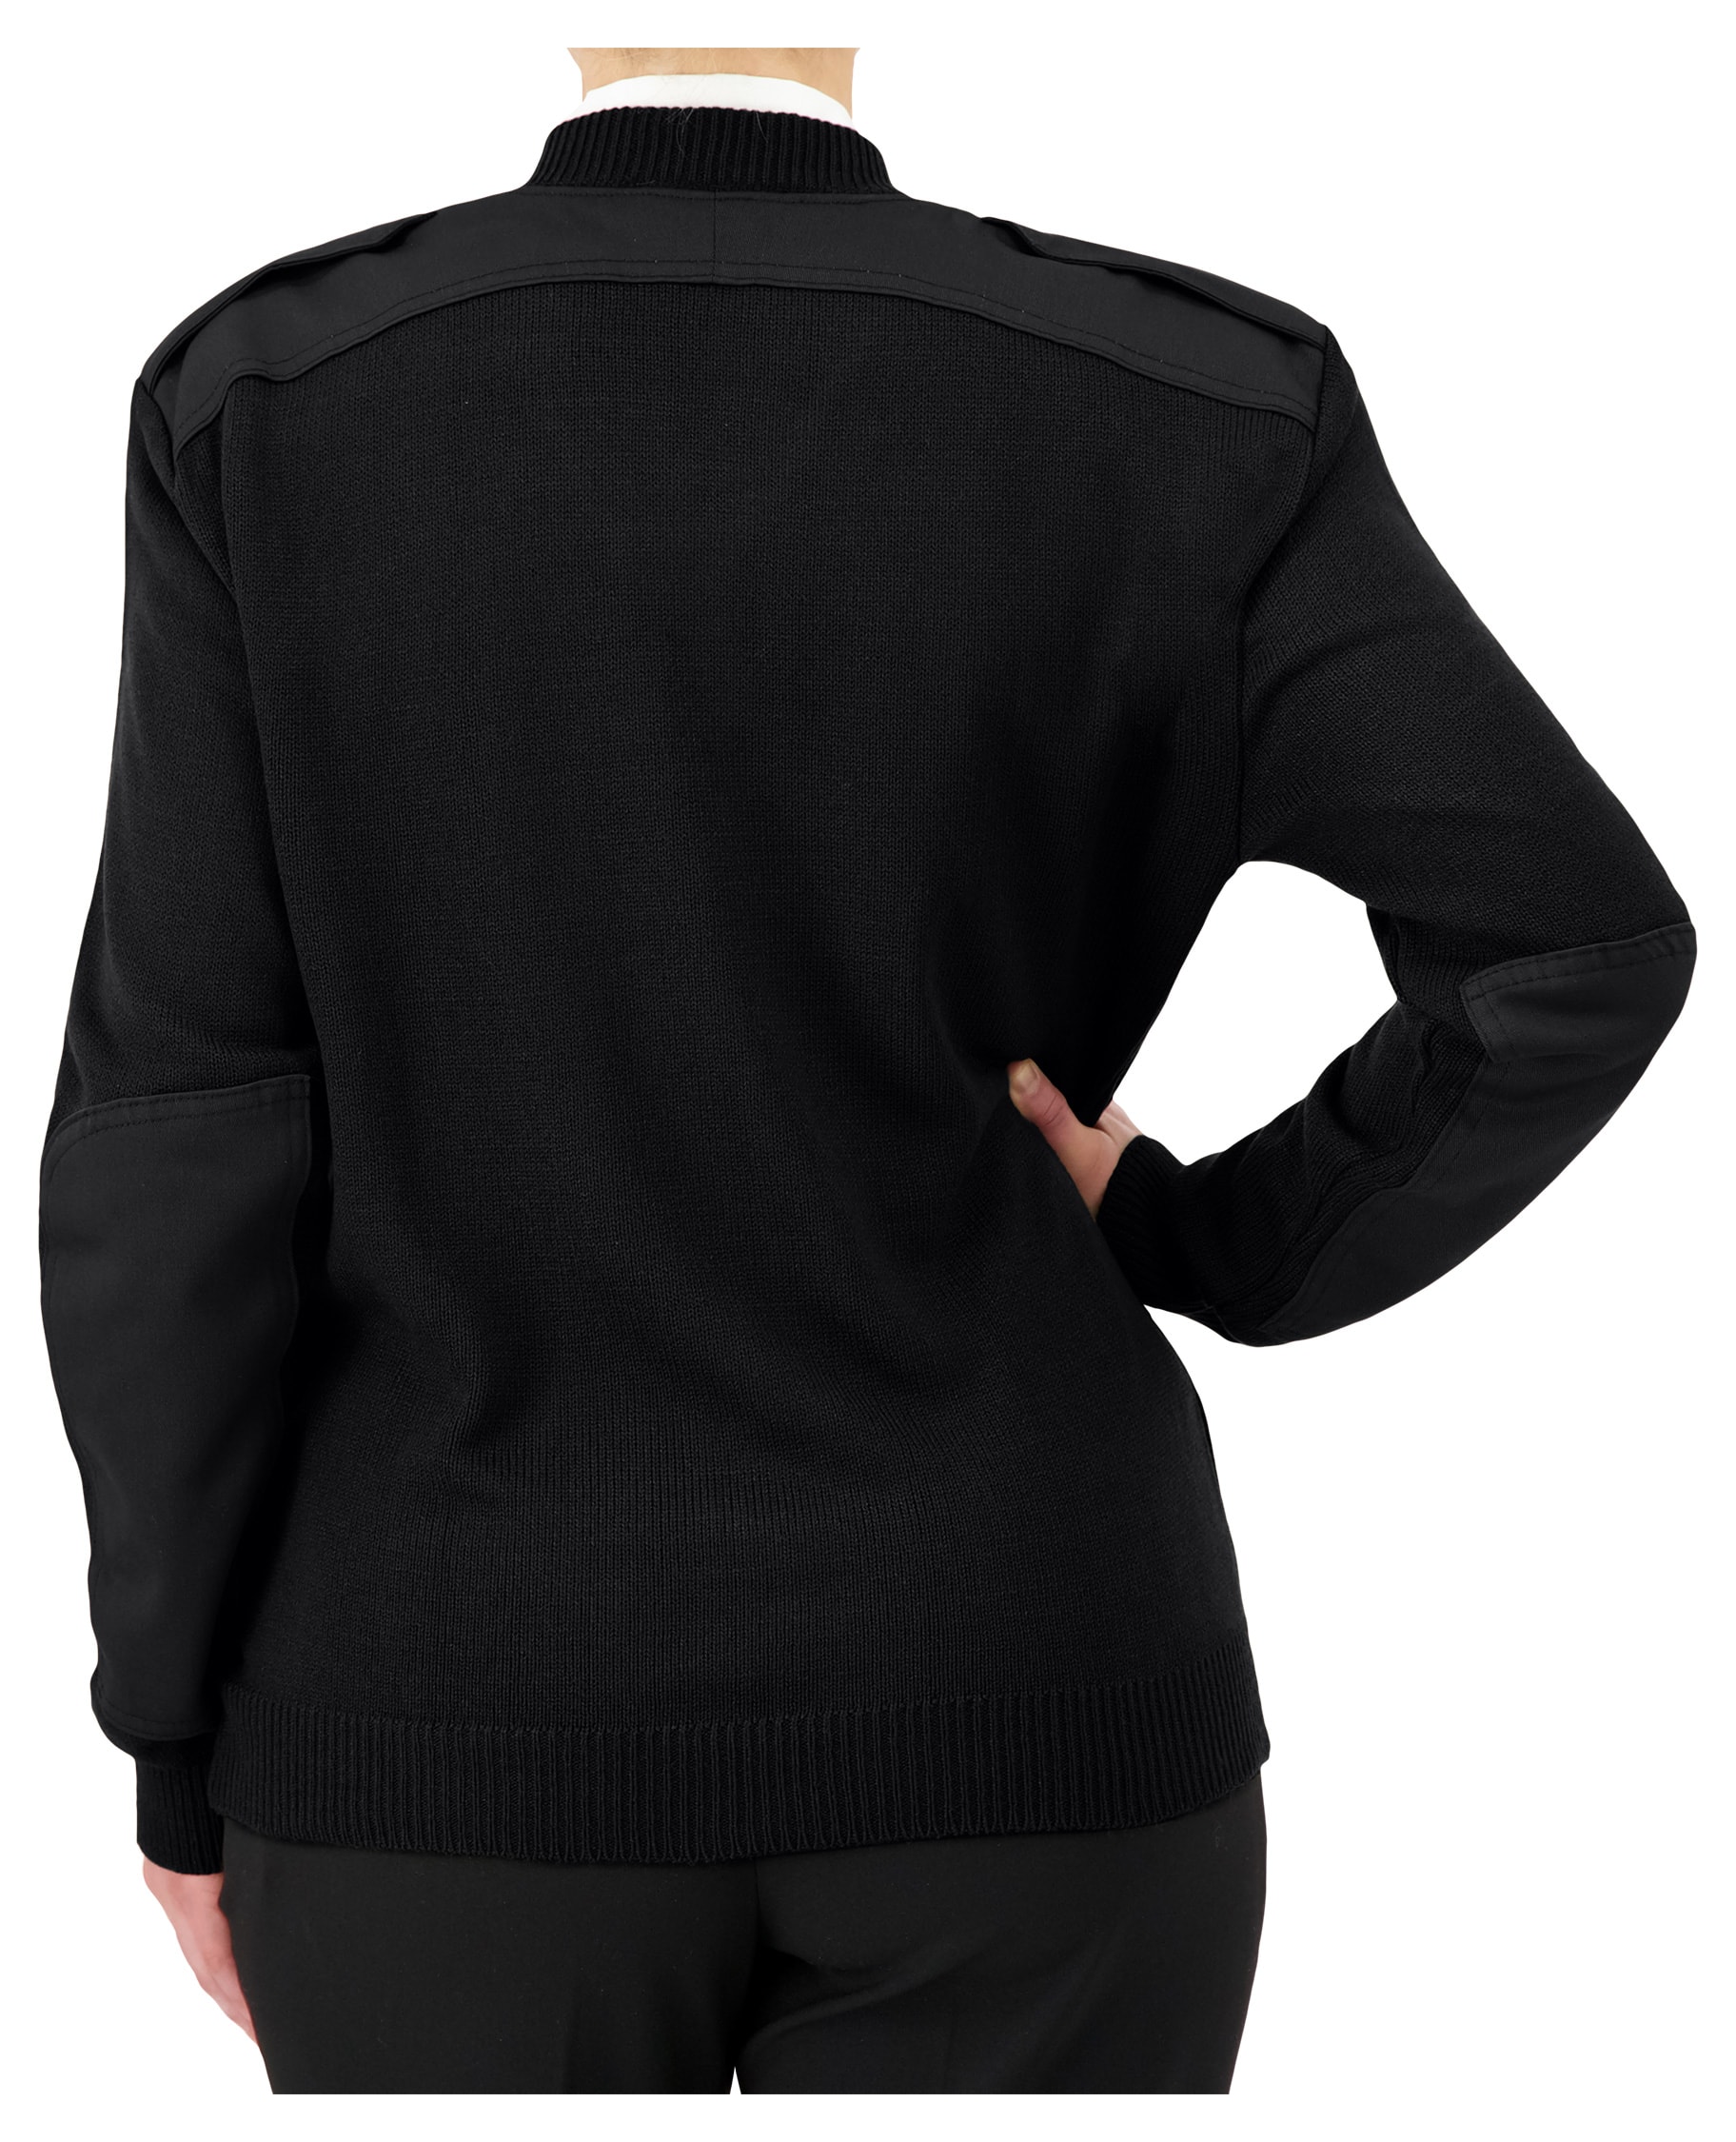 back of black v-neck sweater with shoulder and elbow patches